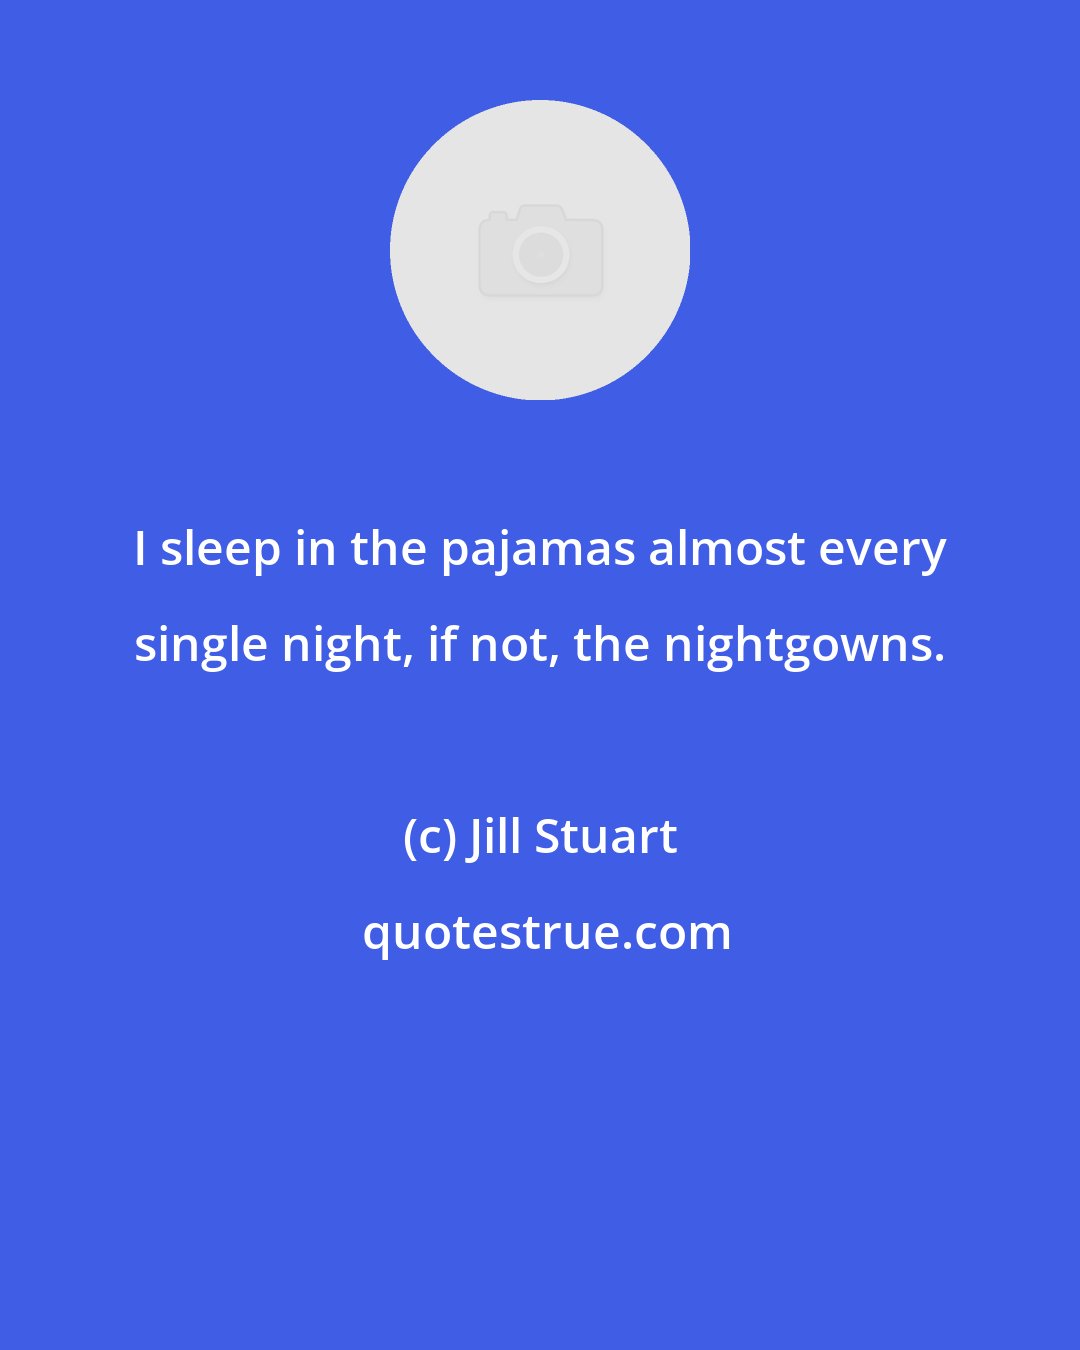 Jill Stuart: I sleep in the pajamas almost every single night, if not, the nightgowns.